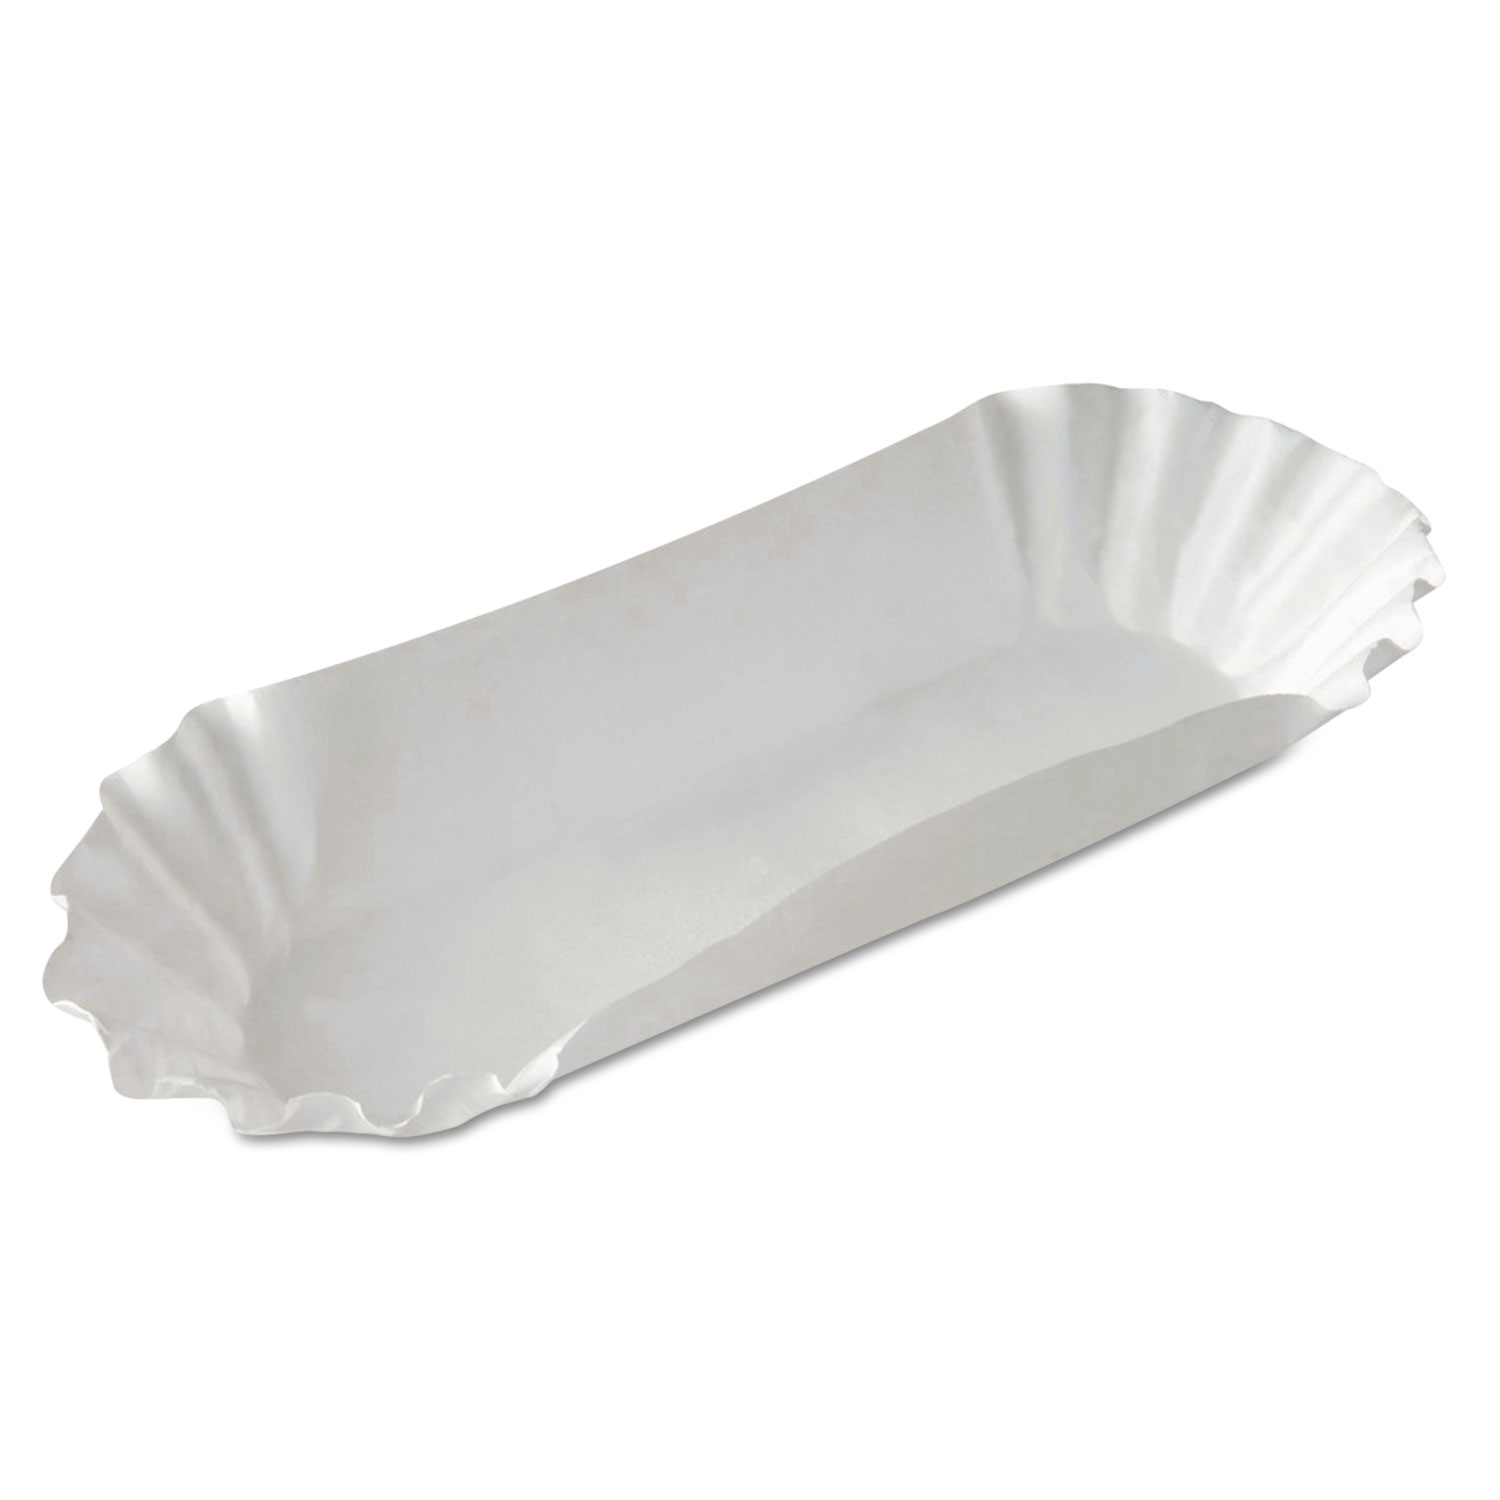  Dixie HD8050 Medium Weight Fluted Hot Dog Trays, Paper, White, 8, 250/PK, 12 PK/CT (DXEHD8050) 